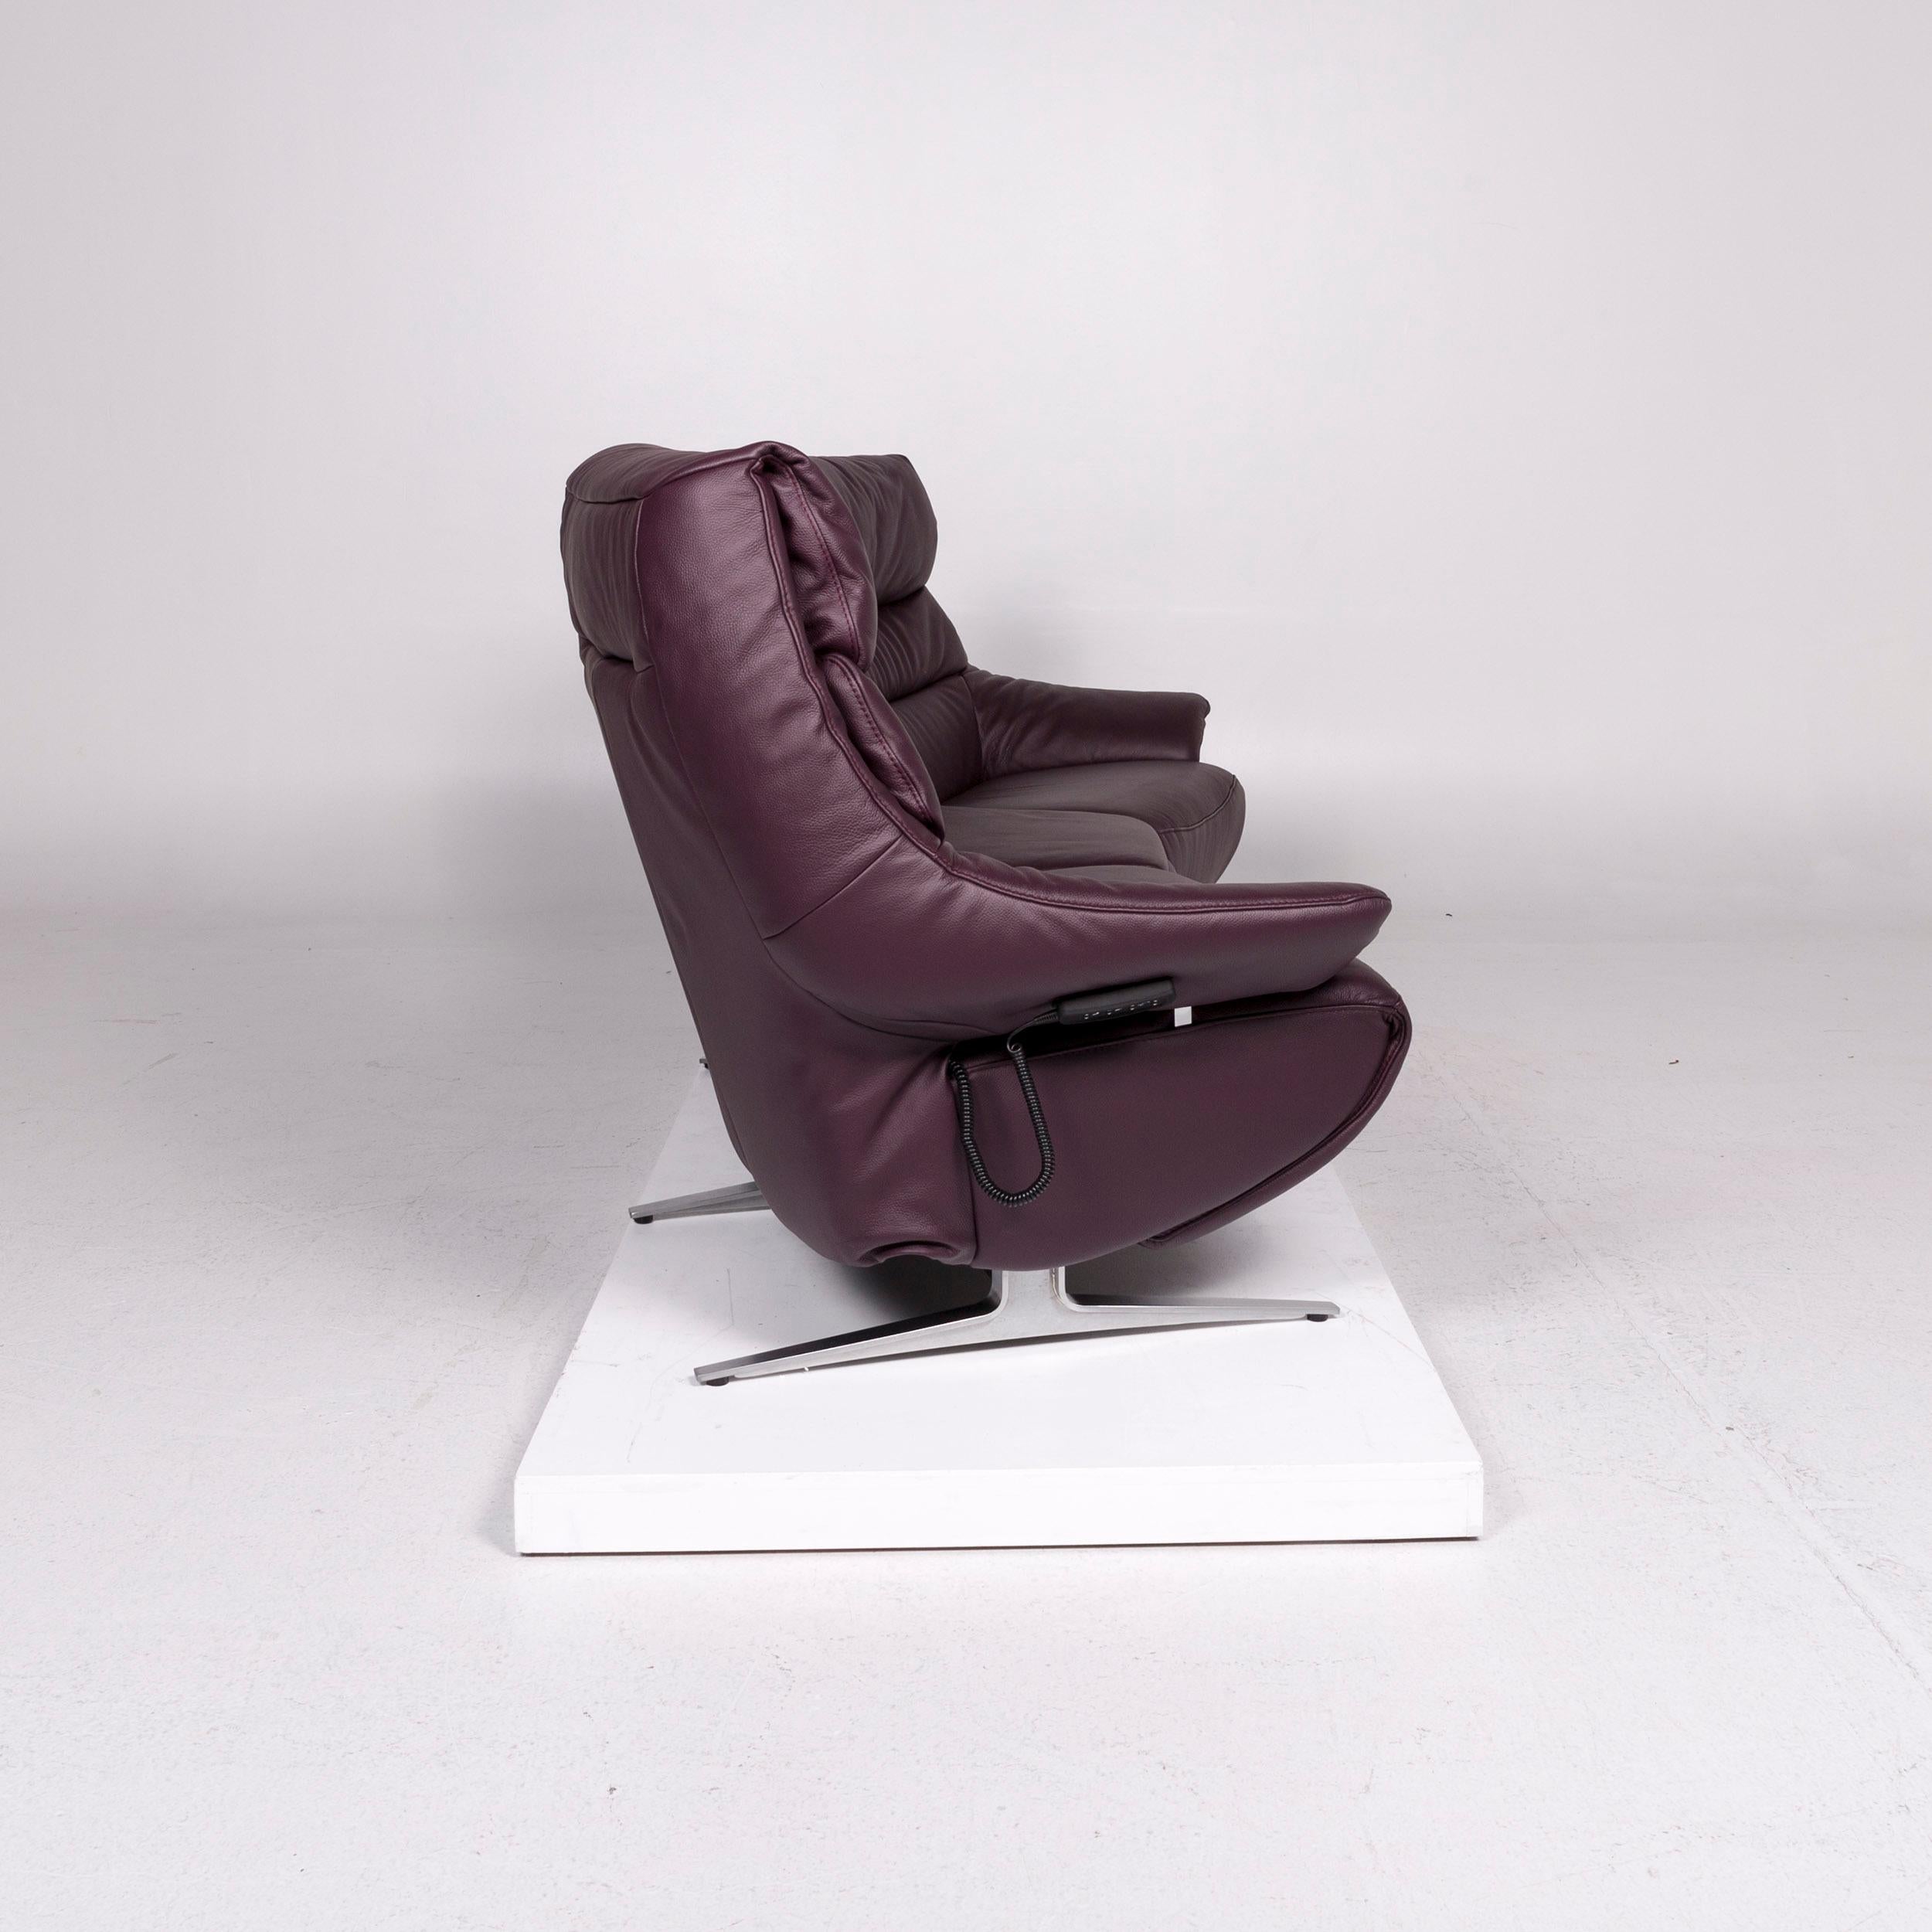 Himolla Leather Sofa Eggplant Purple Relax Function Electrical Function Couch 4